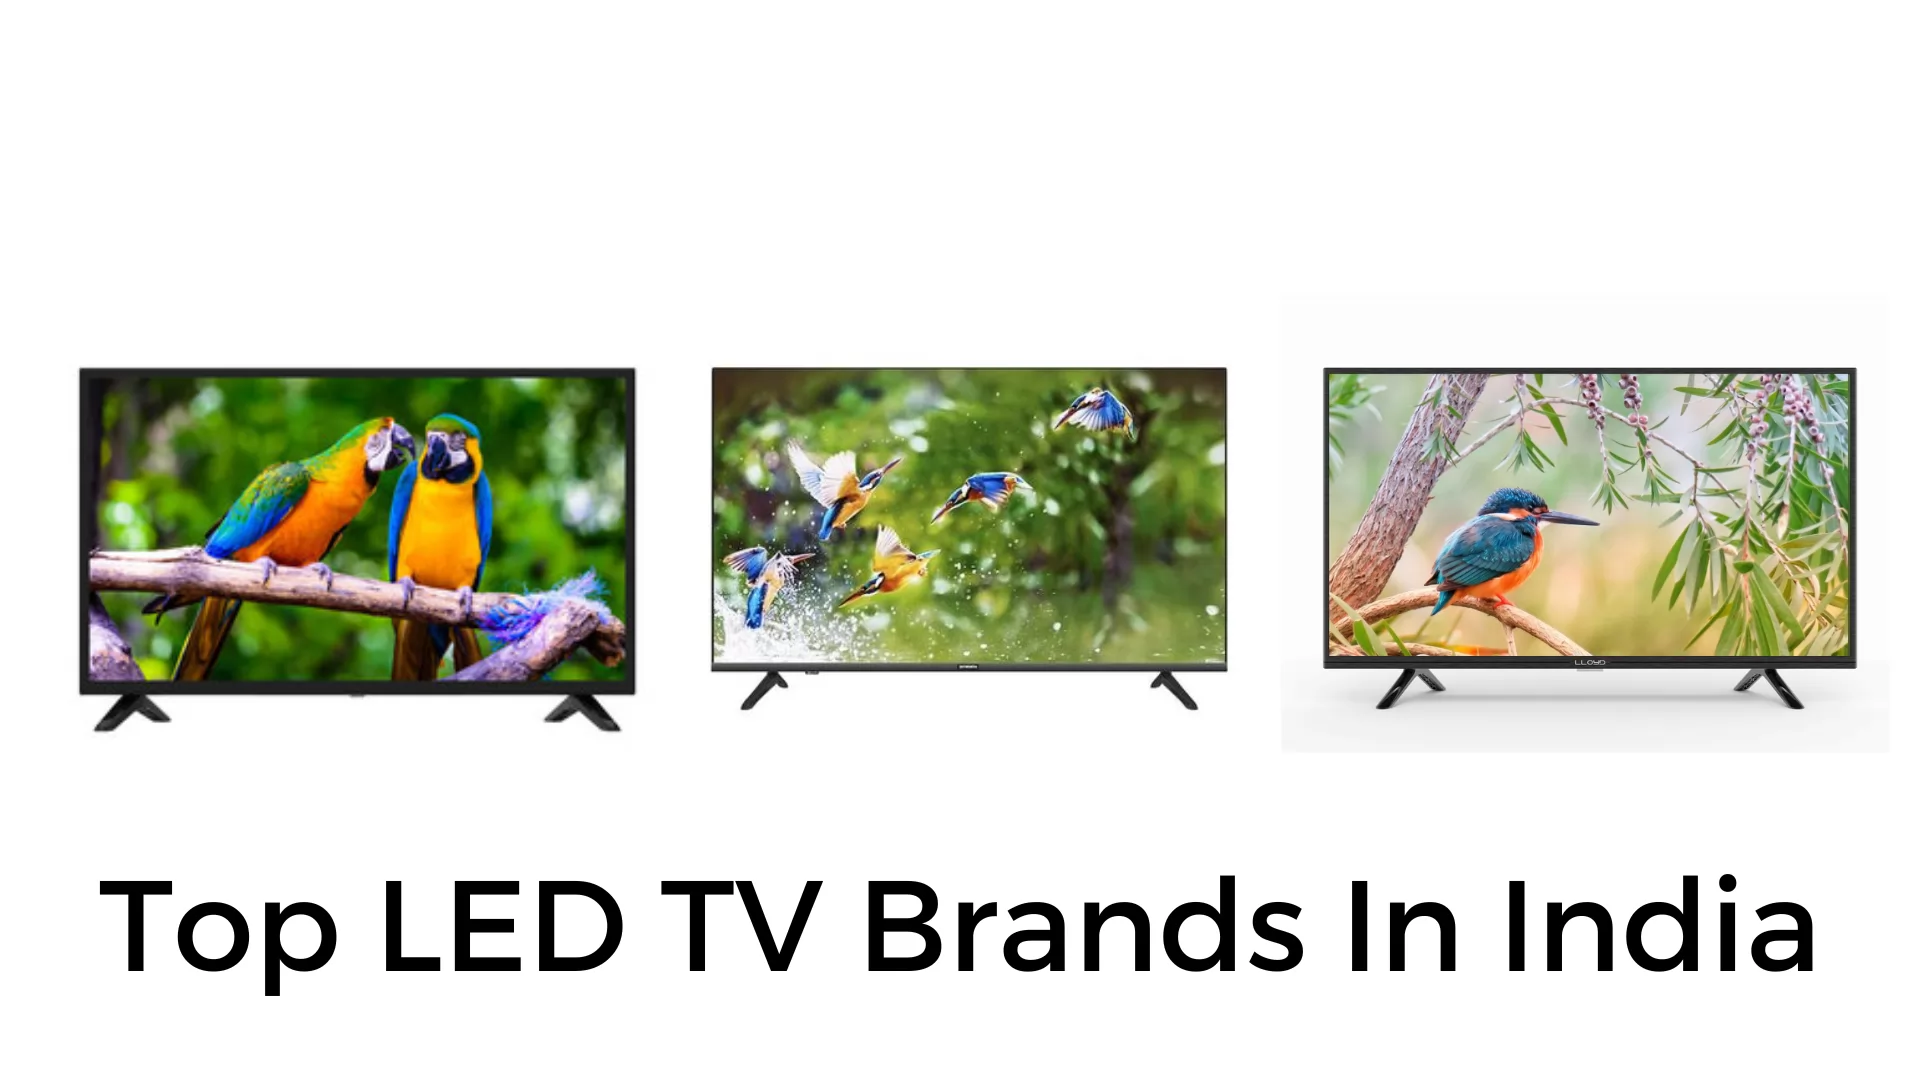 Top LED TV Brands in India